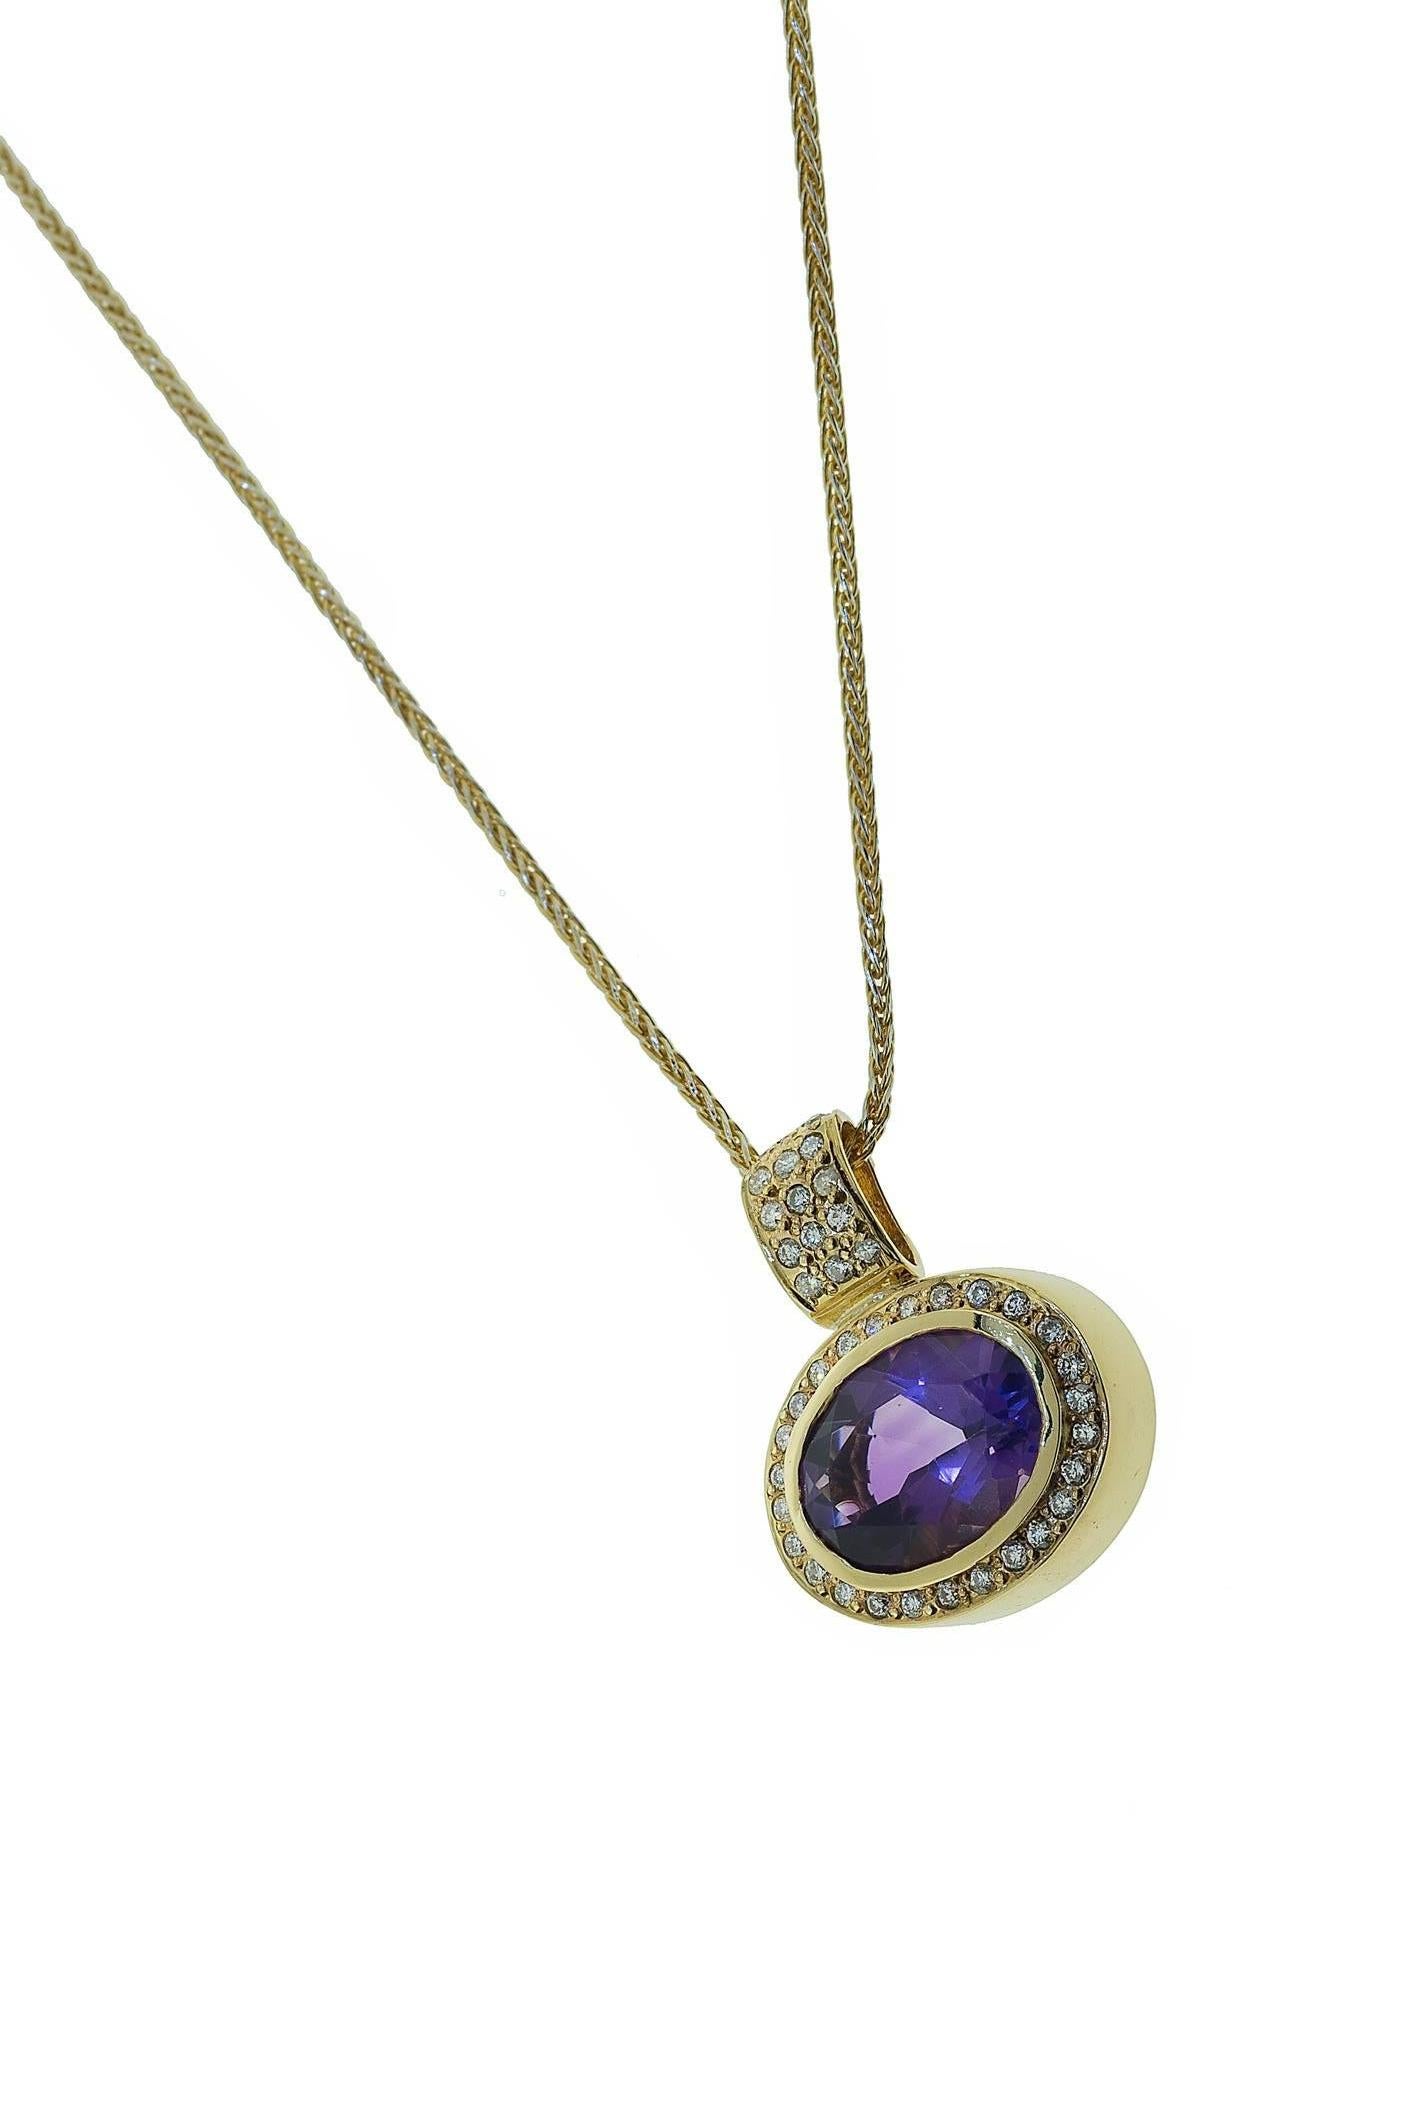 18K yellow gold oval amethyst and diamond pendant necklace. The 6.00 carat oval faceted amethyst is bezel set and surrounded by pave set diamonds. The bail is also set with pave set diamond. The diamonds weigh combined 0.41 carat. The pendant hangs